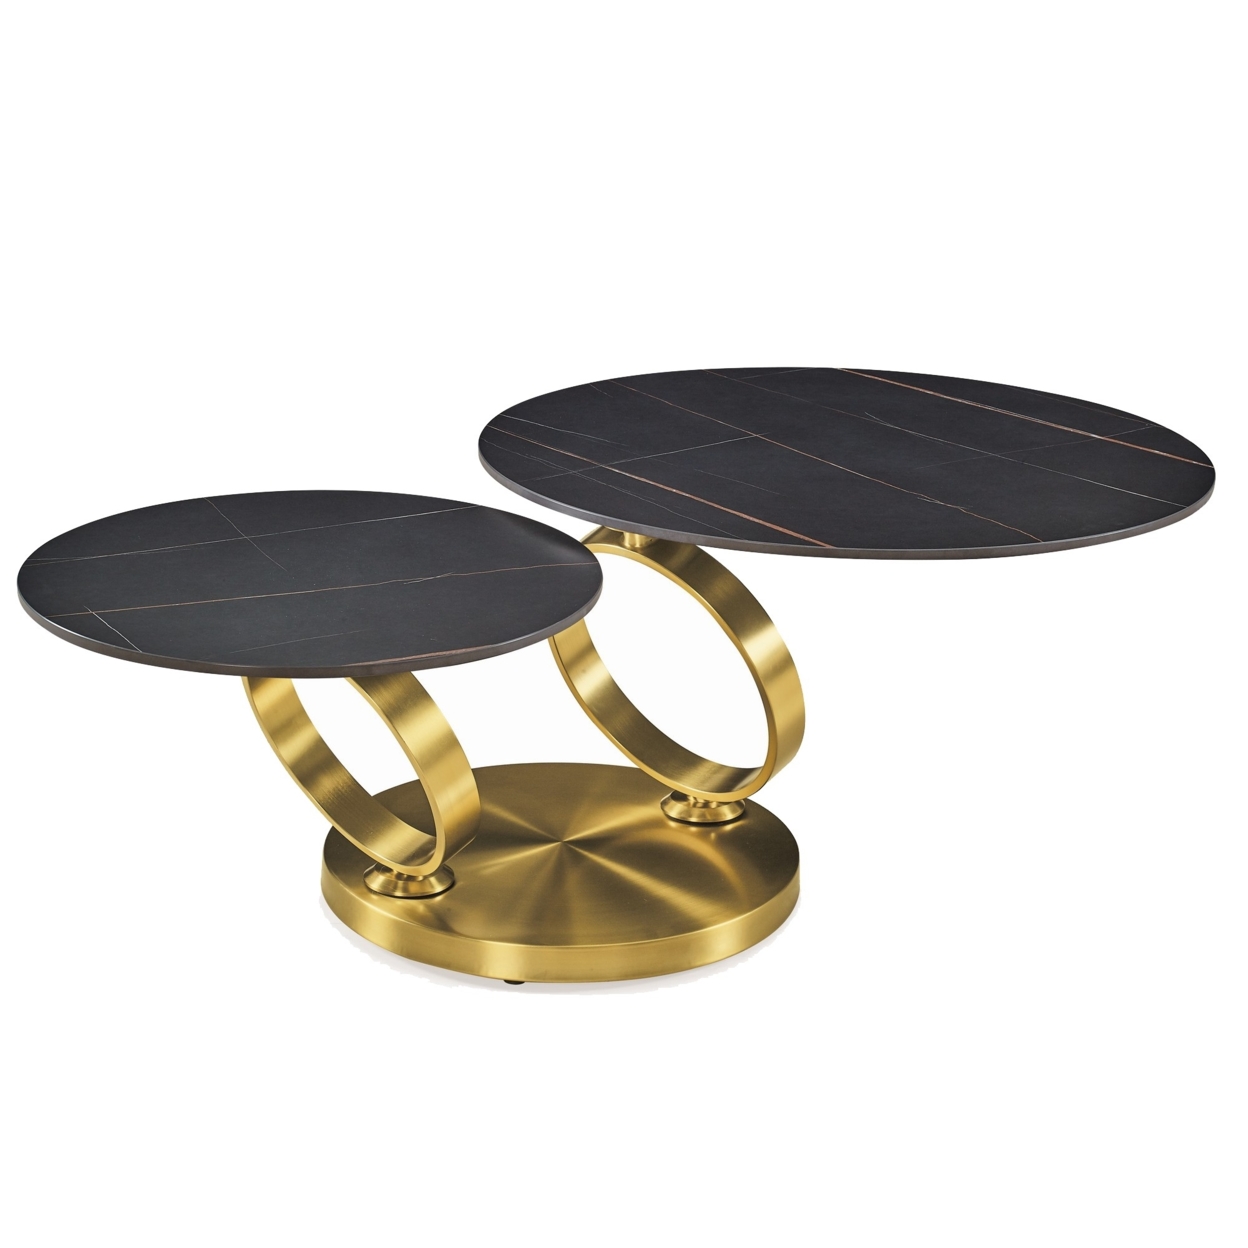 Dual Ceramic Top Coffee Table With Motion Mechanism, Black And Gold- Saltoro Sherpi